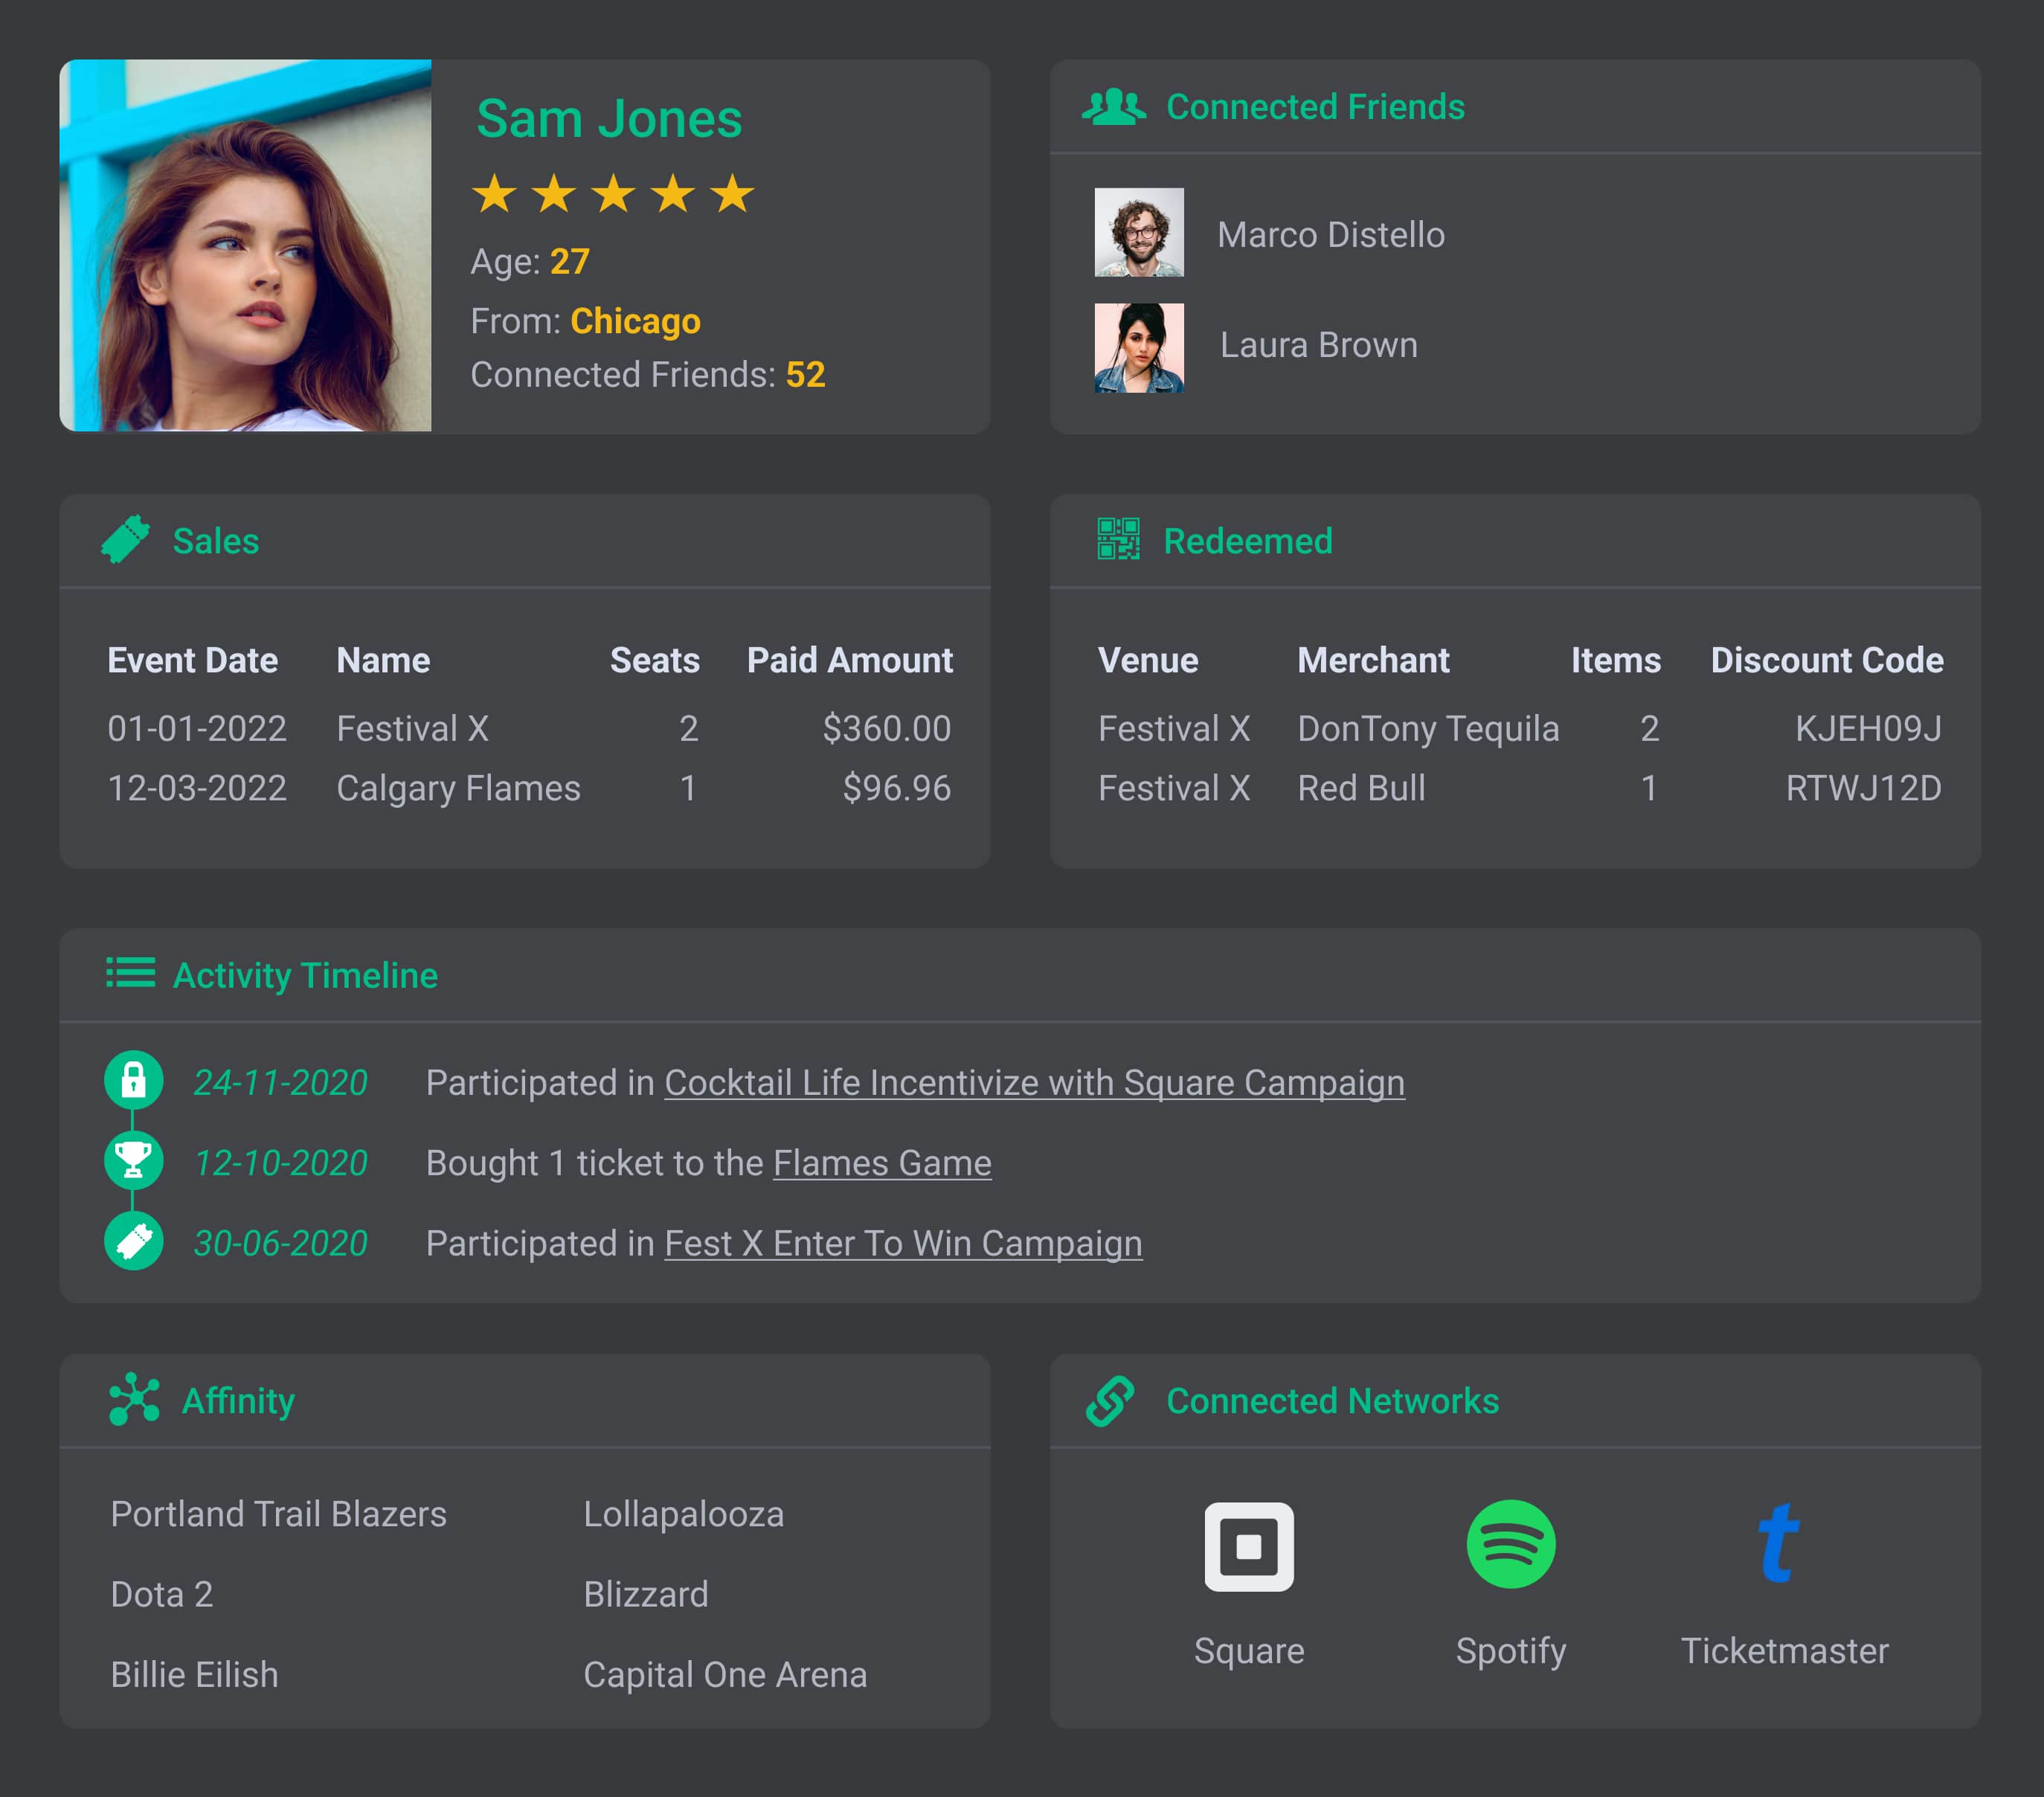 Example of a Fan CRM Profile Page